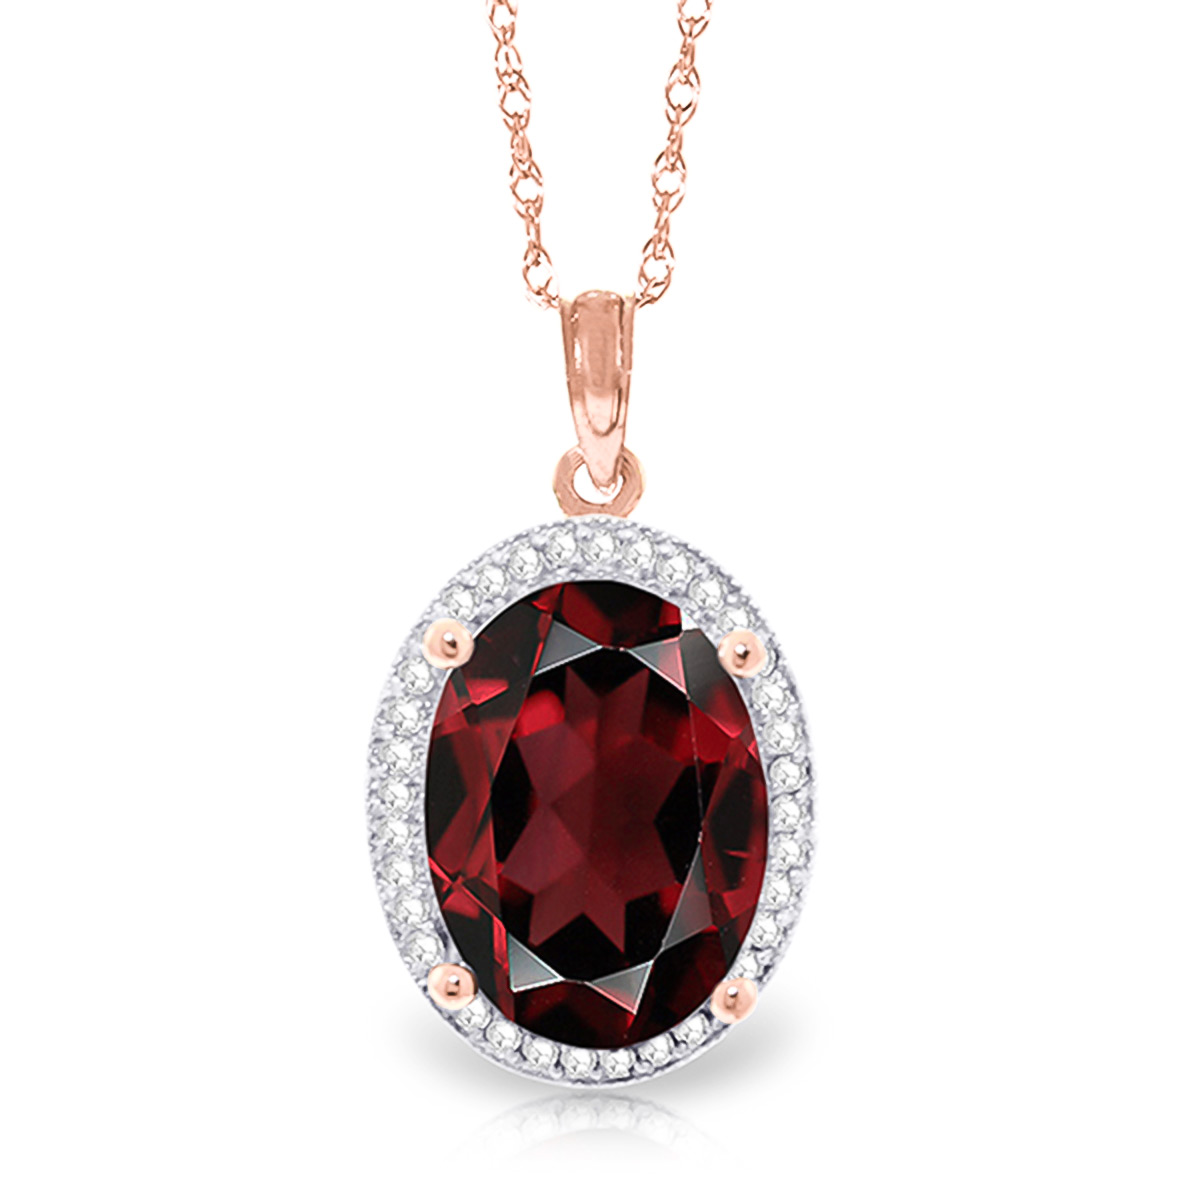 Garnet Halo Pendant Necklace 6.23 ctw in 9ct Rose Gold